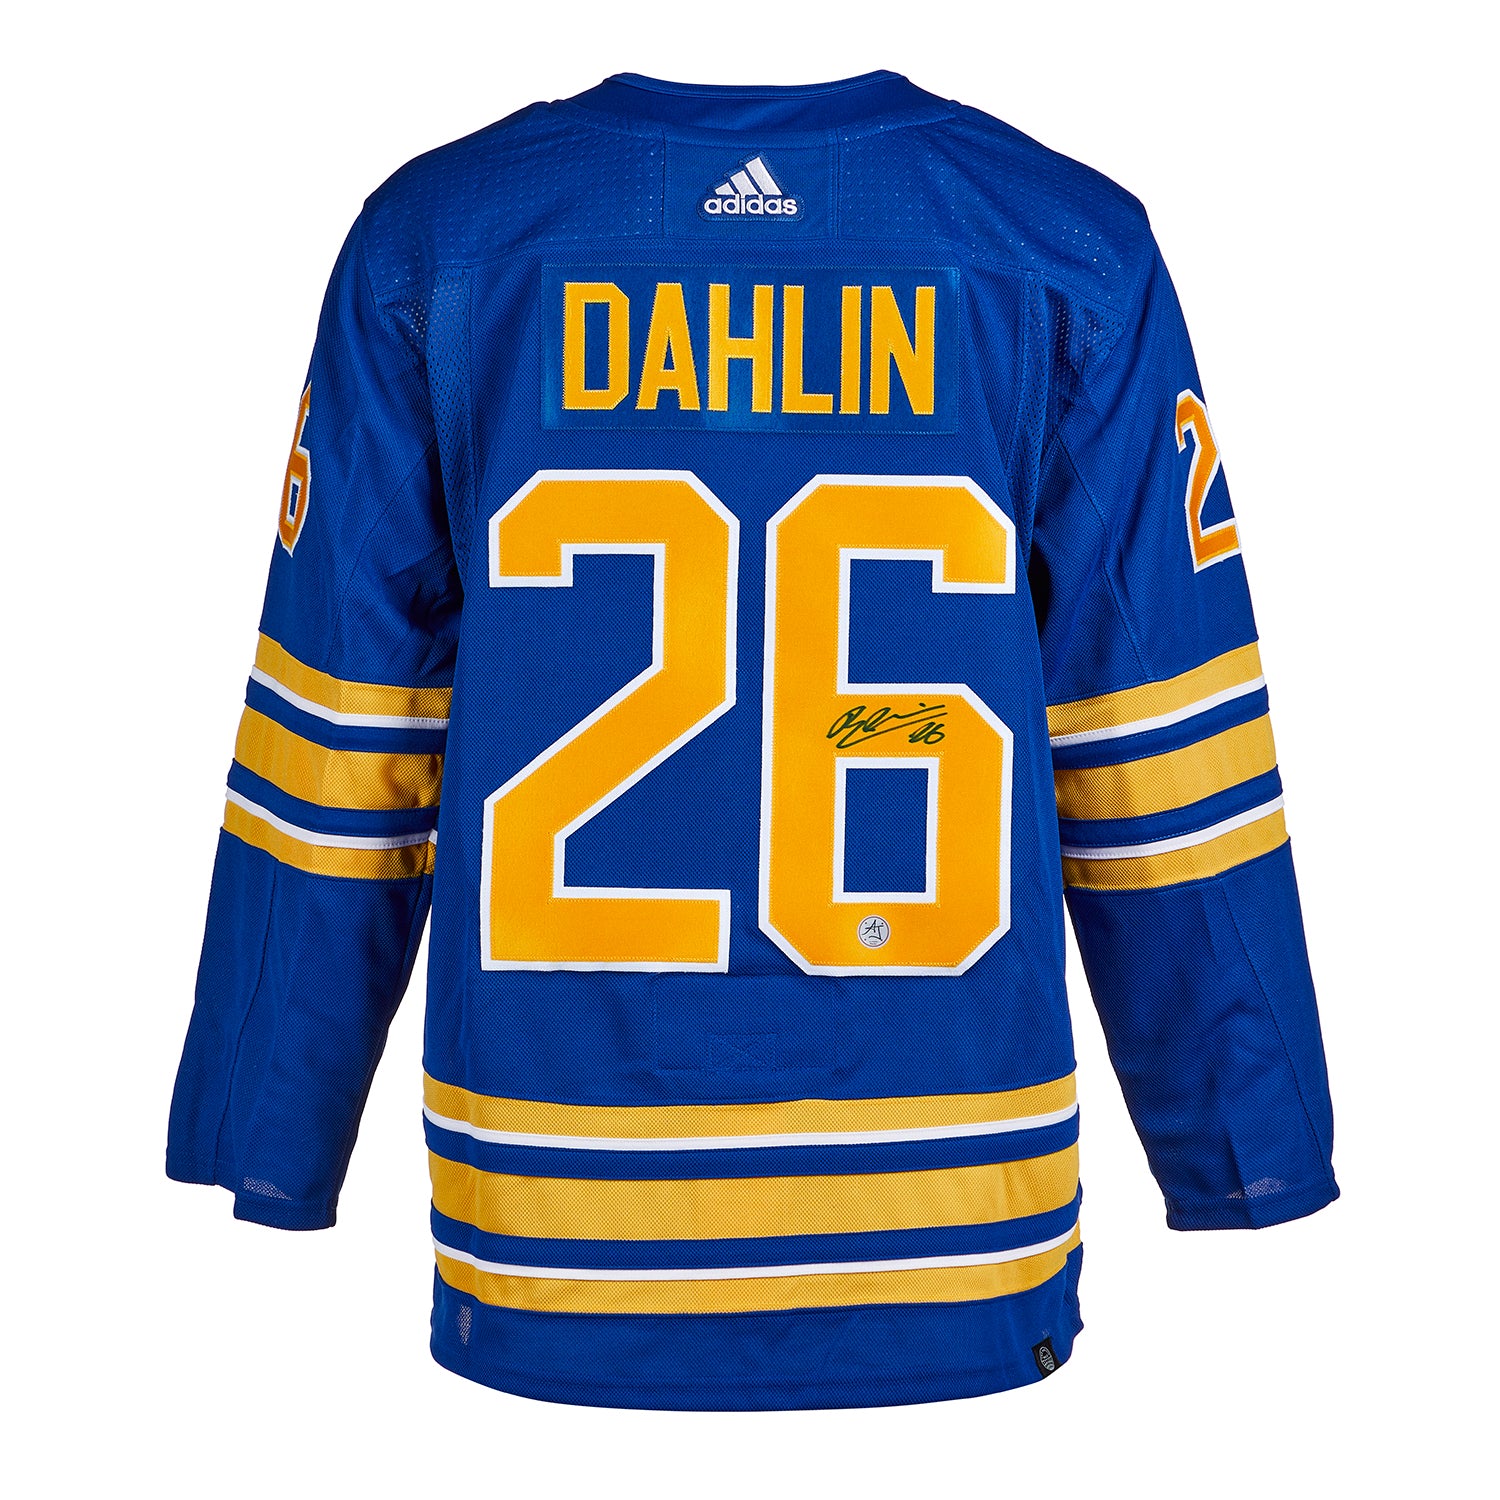 Rasmus Dahlin Buffalo Sabres Autographed Blue Adidas Authentic Jersey with  NHL Debut 10/4/18 Inscription